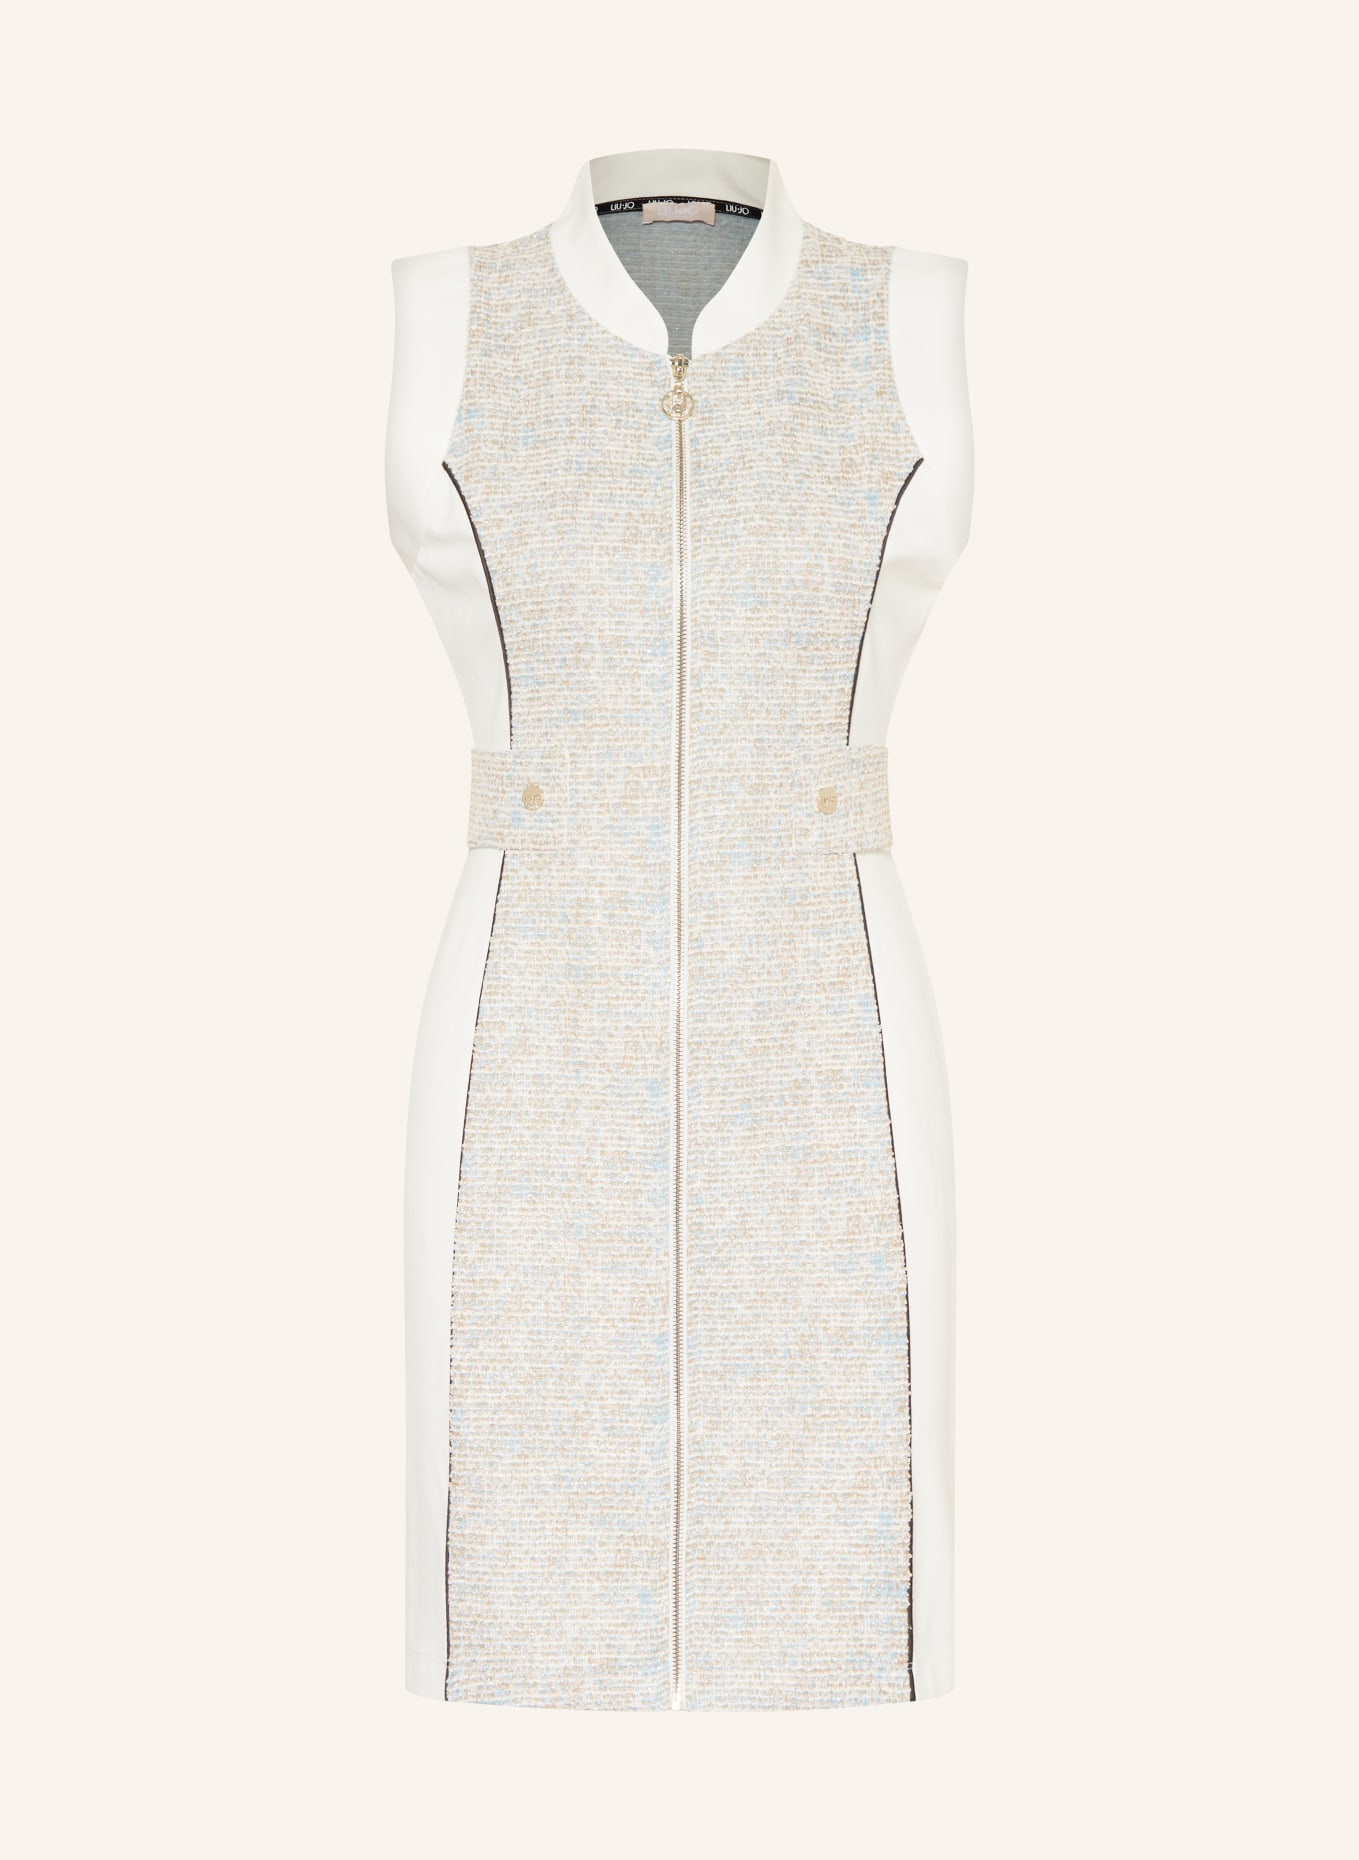 LIU JO Dress in mixed materials, Color: WHITE/ BEIGE/ LIGHT BLUE (Image 1)